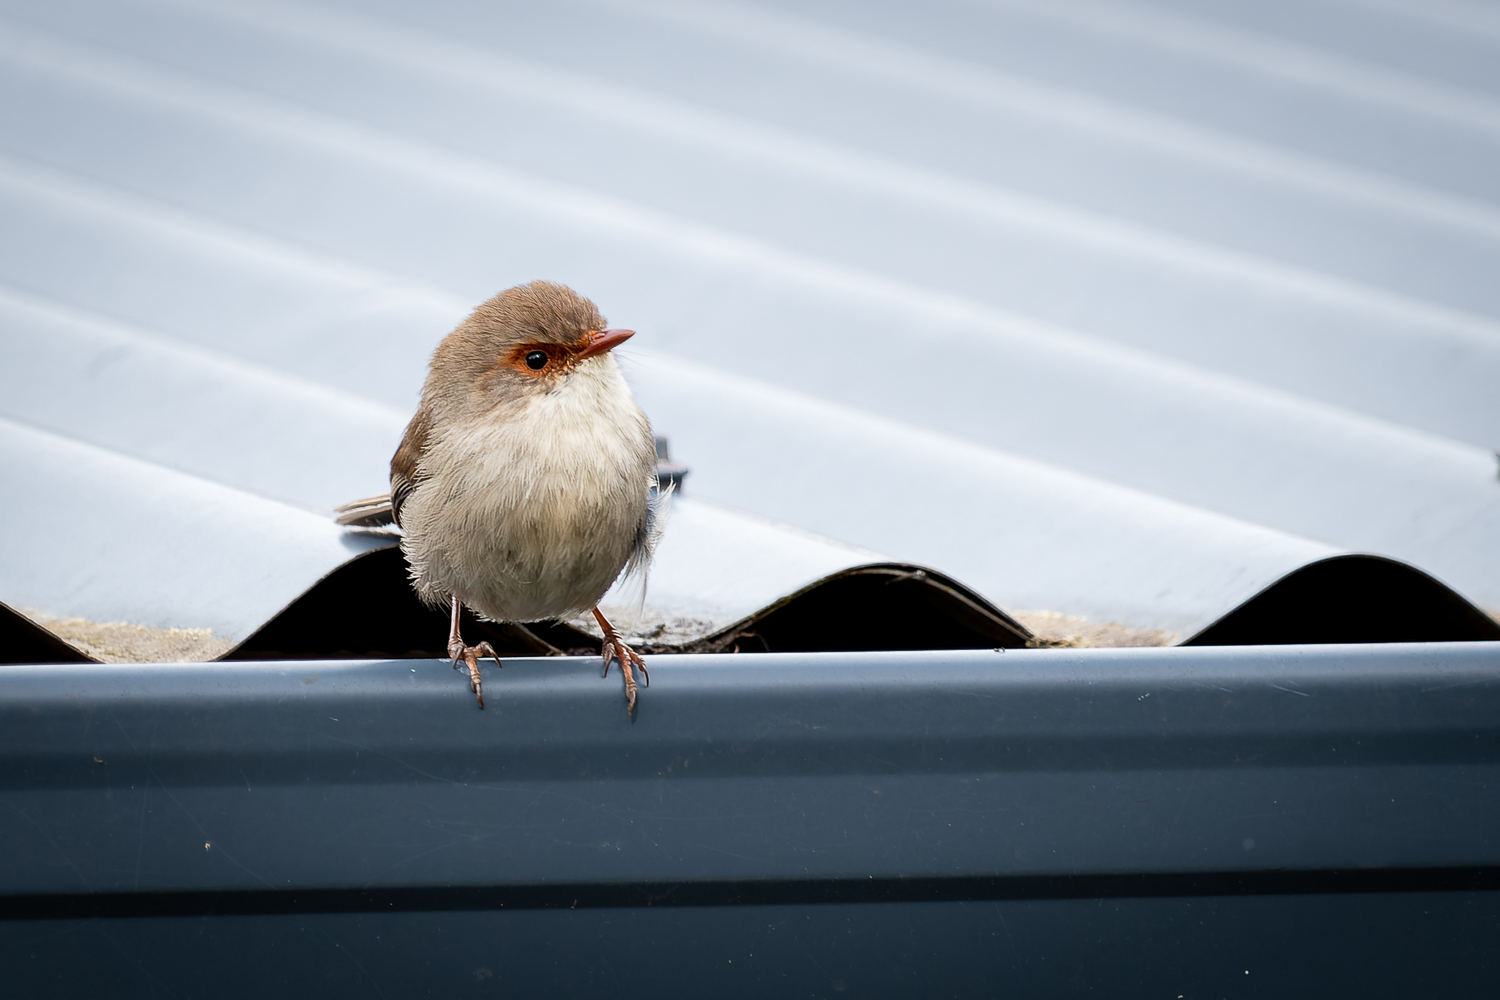 A small female wren on a corrugated iron roof